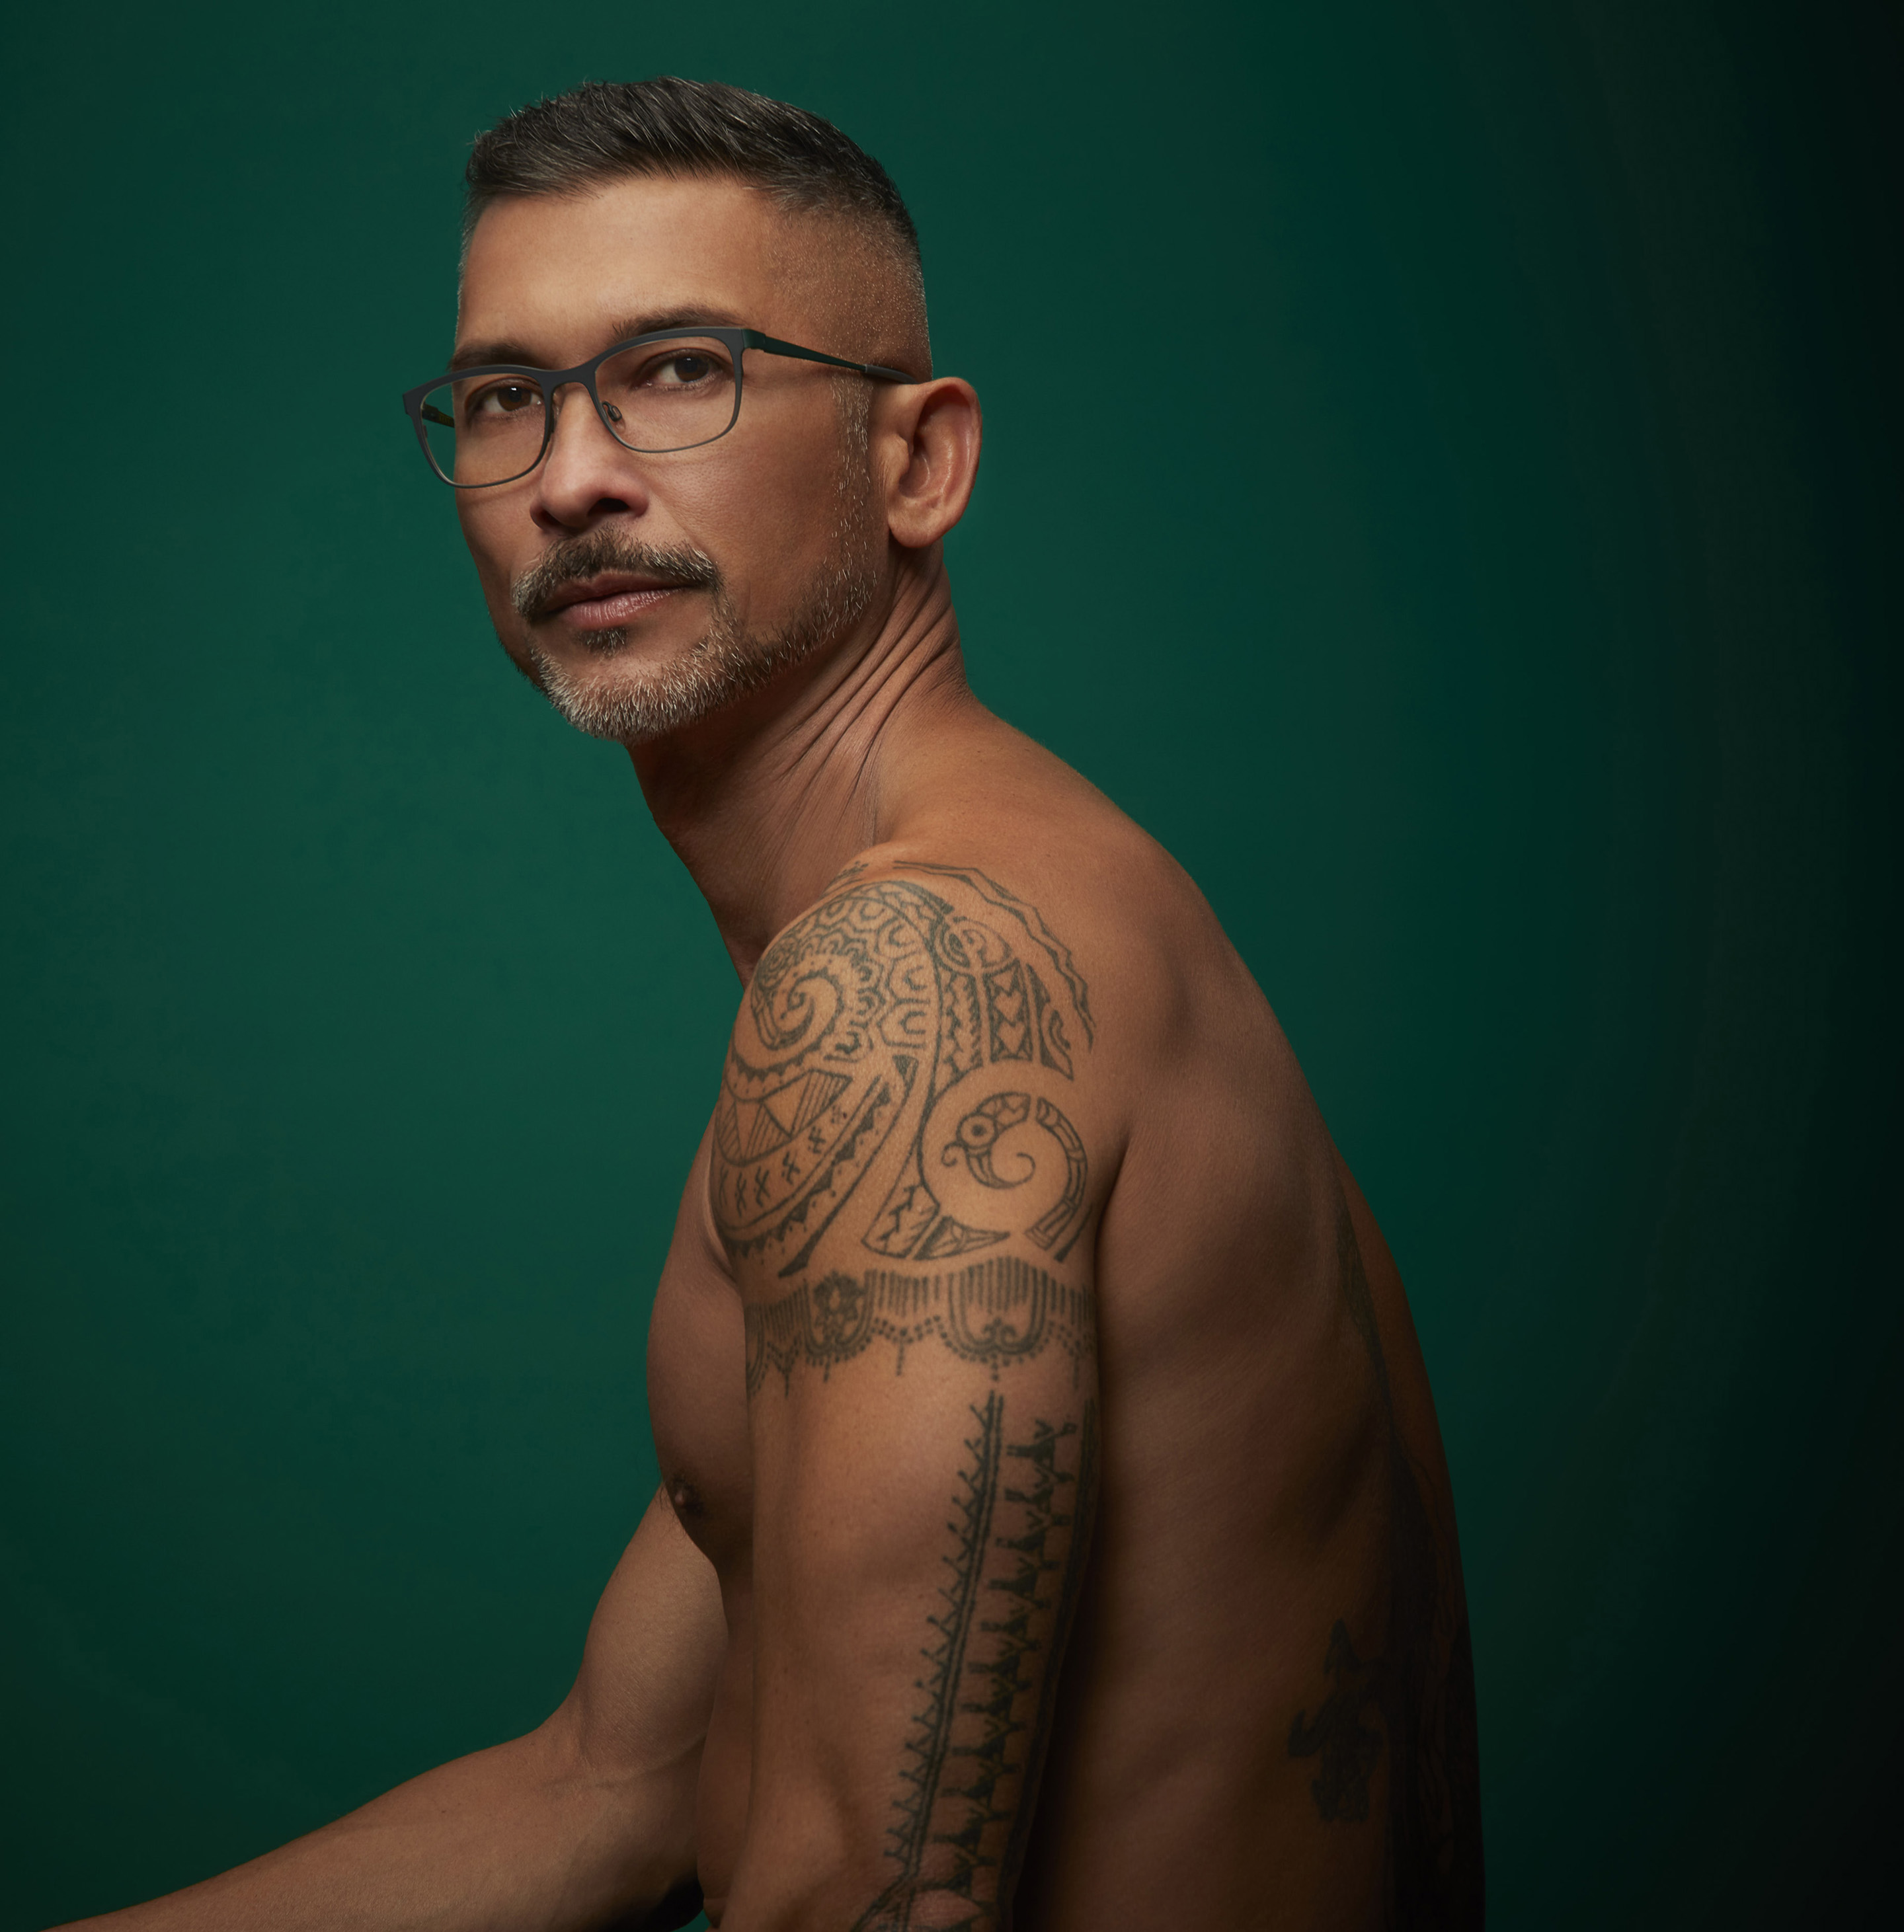 Man with tattoos wearing glasses and no shirt San Francisco fashion photographer